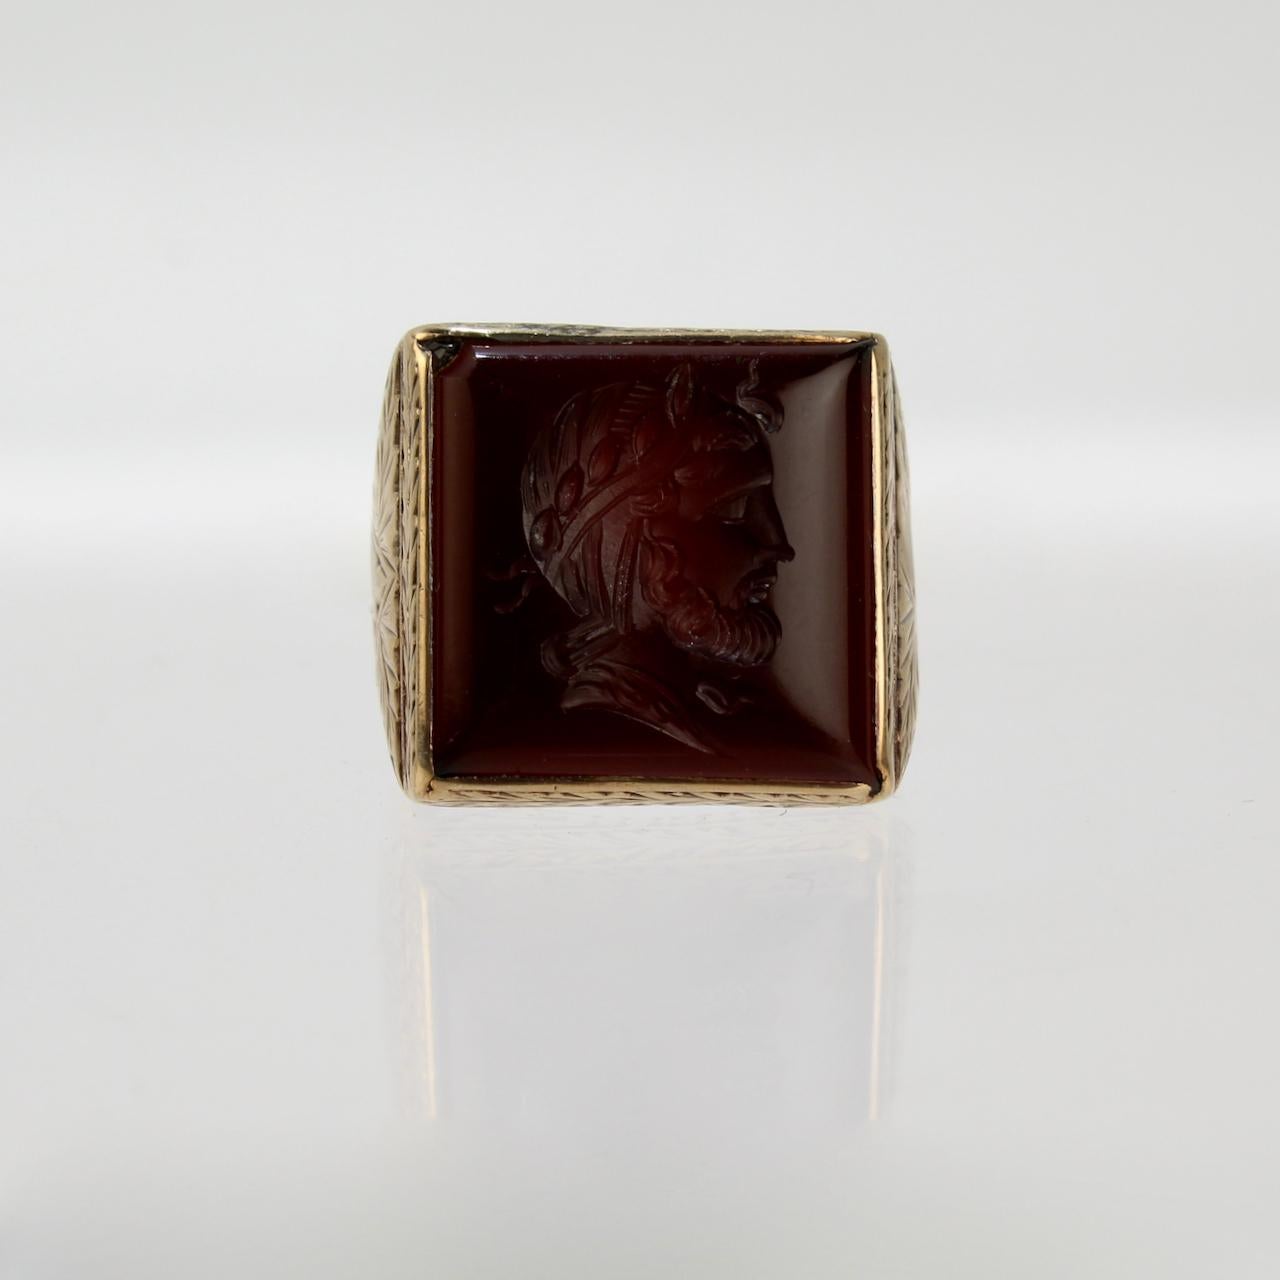 Etruscan Revival 14 Karat Gold Carved Carnelian Intaglio Signet Ring with a Roman Bust